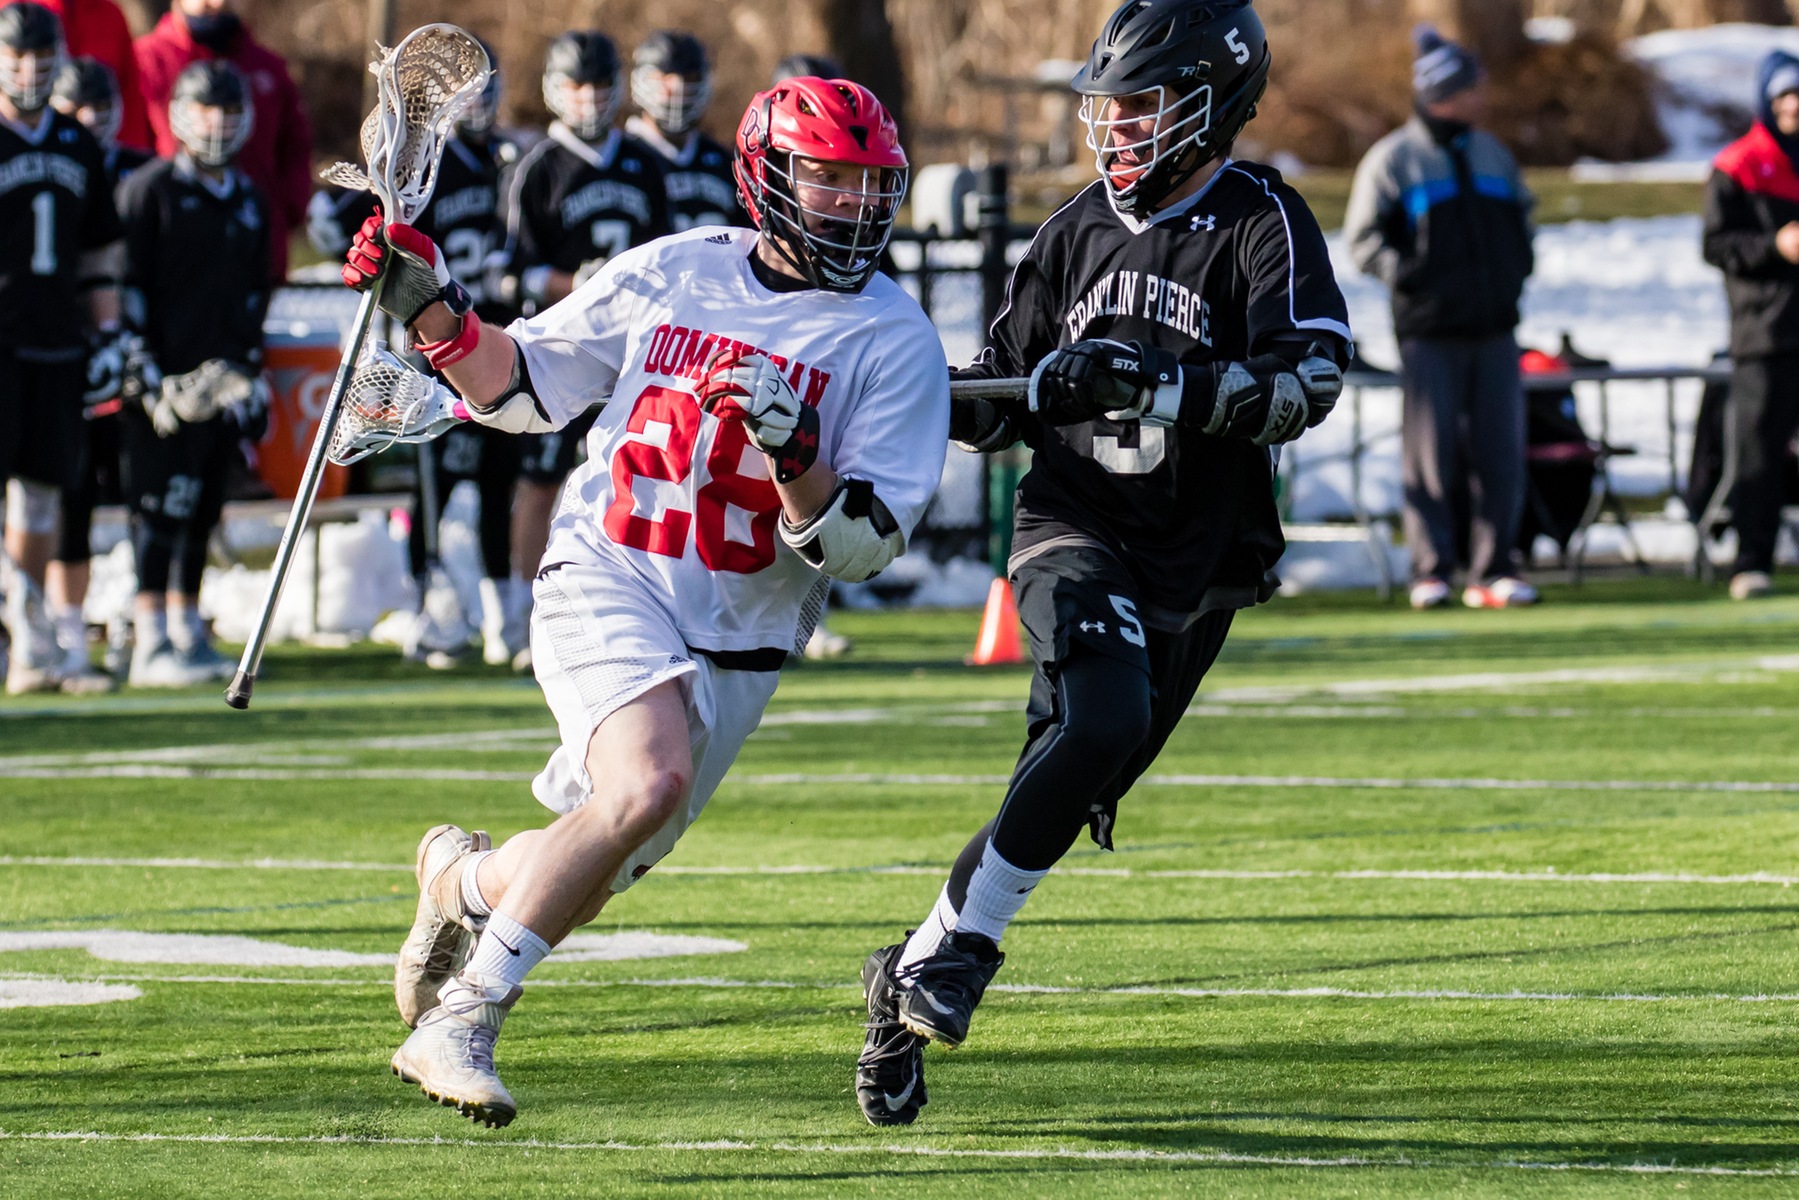 The Dominican College men's lacrosse team fell to Wilmington University, 9-8, this afternoon.